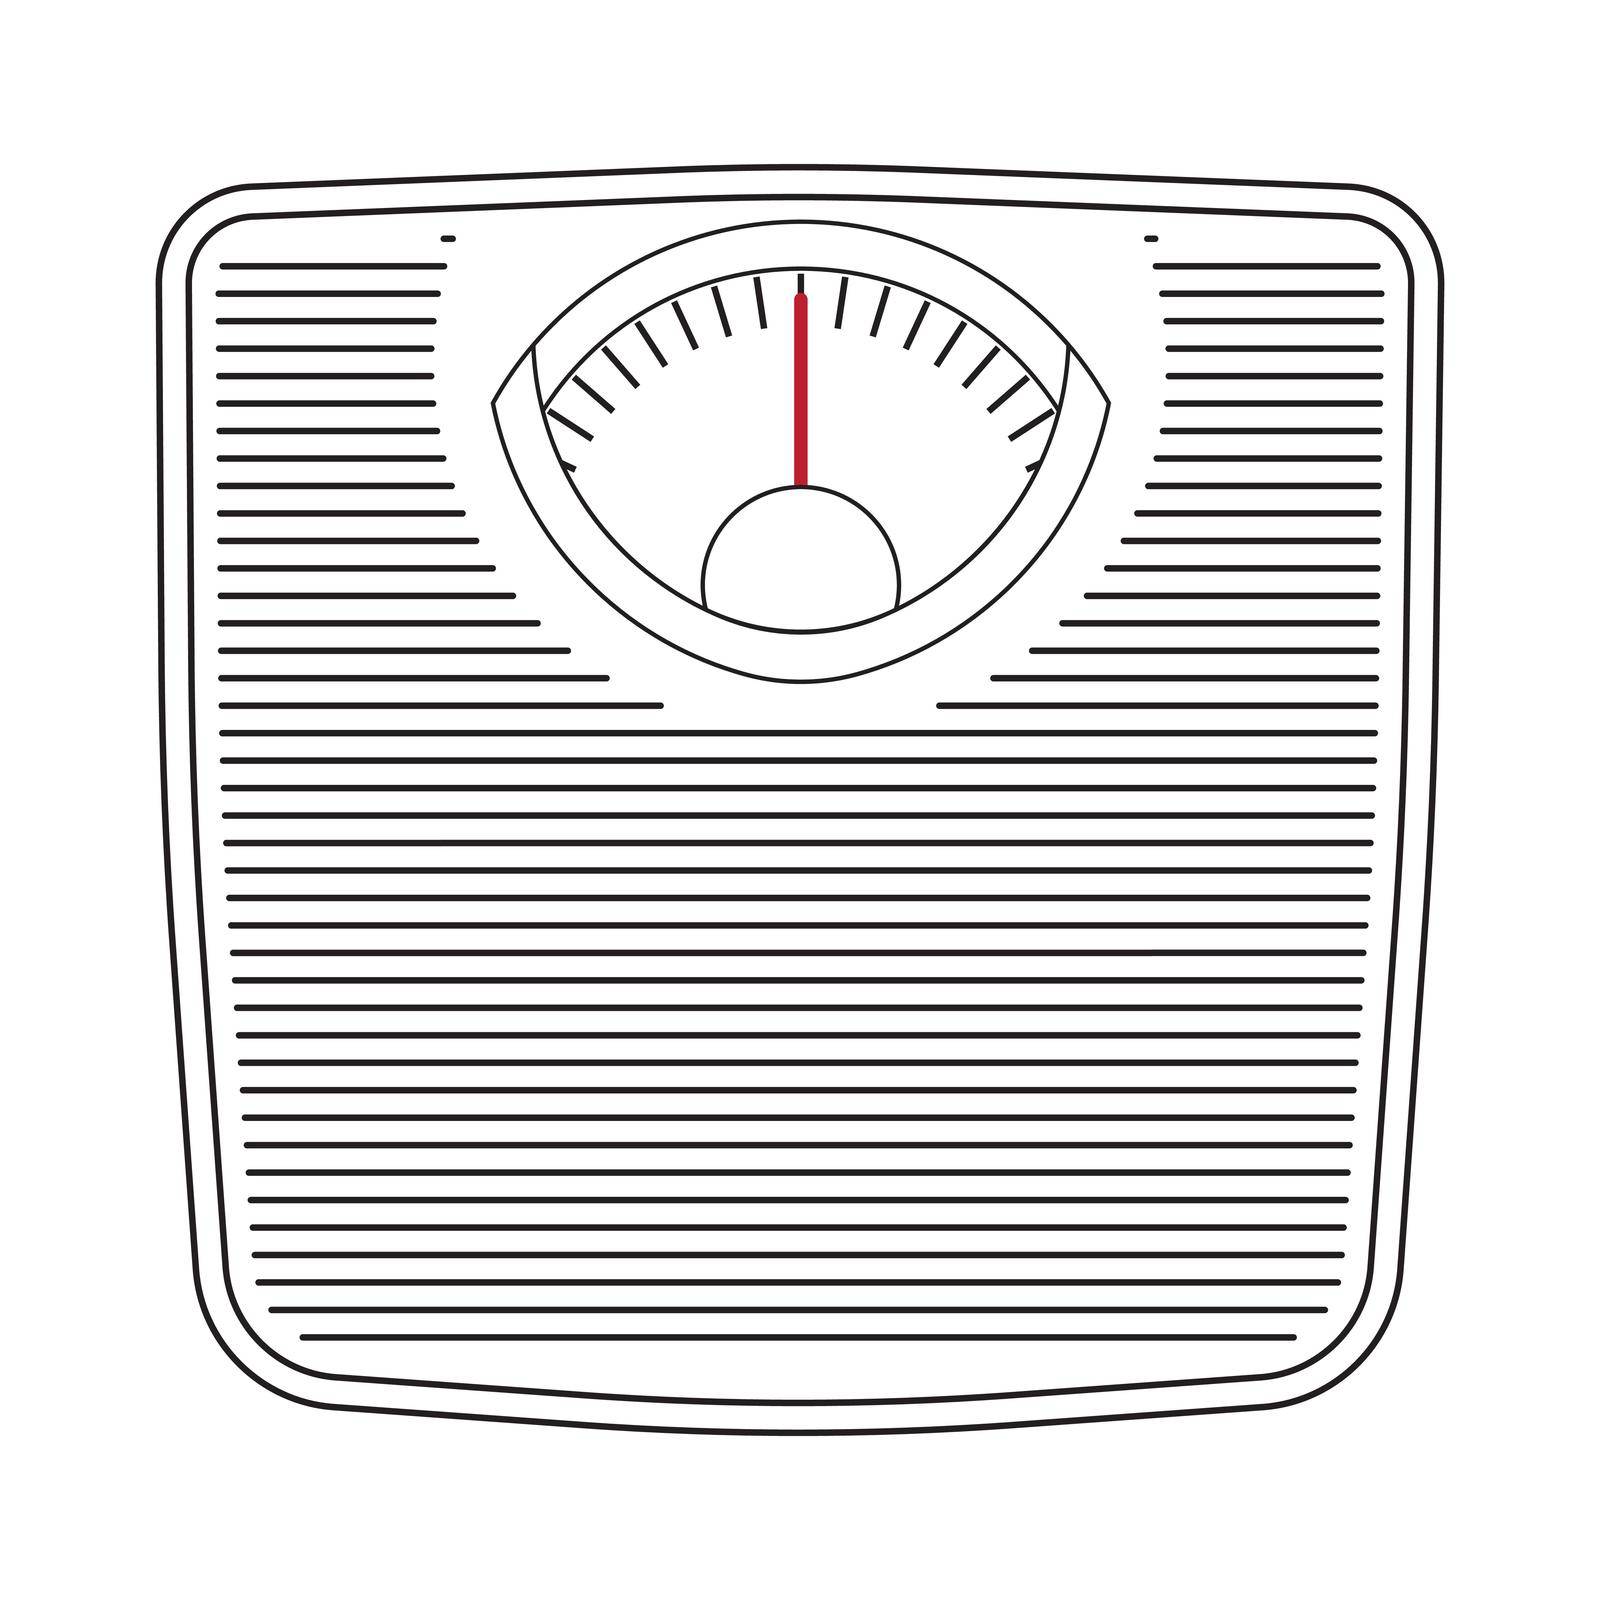 Weighing scale isolated. Floor weight scale. Scale icon. Vector illustration.